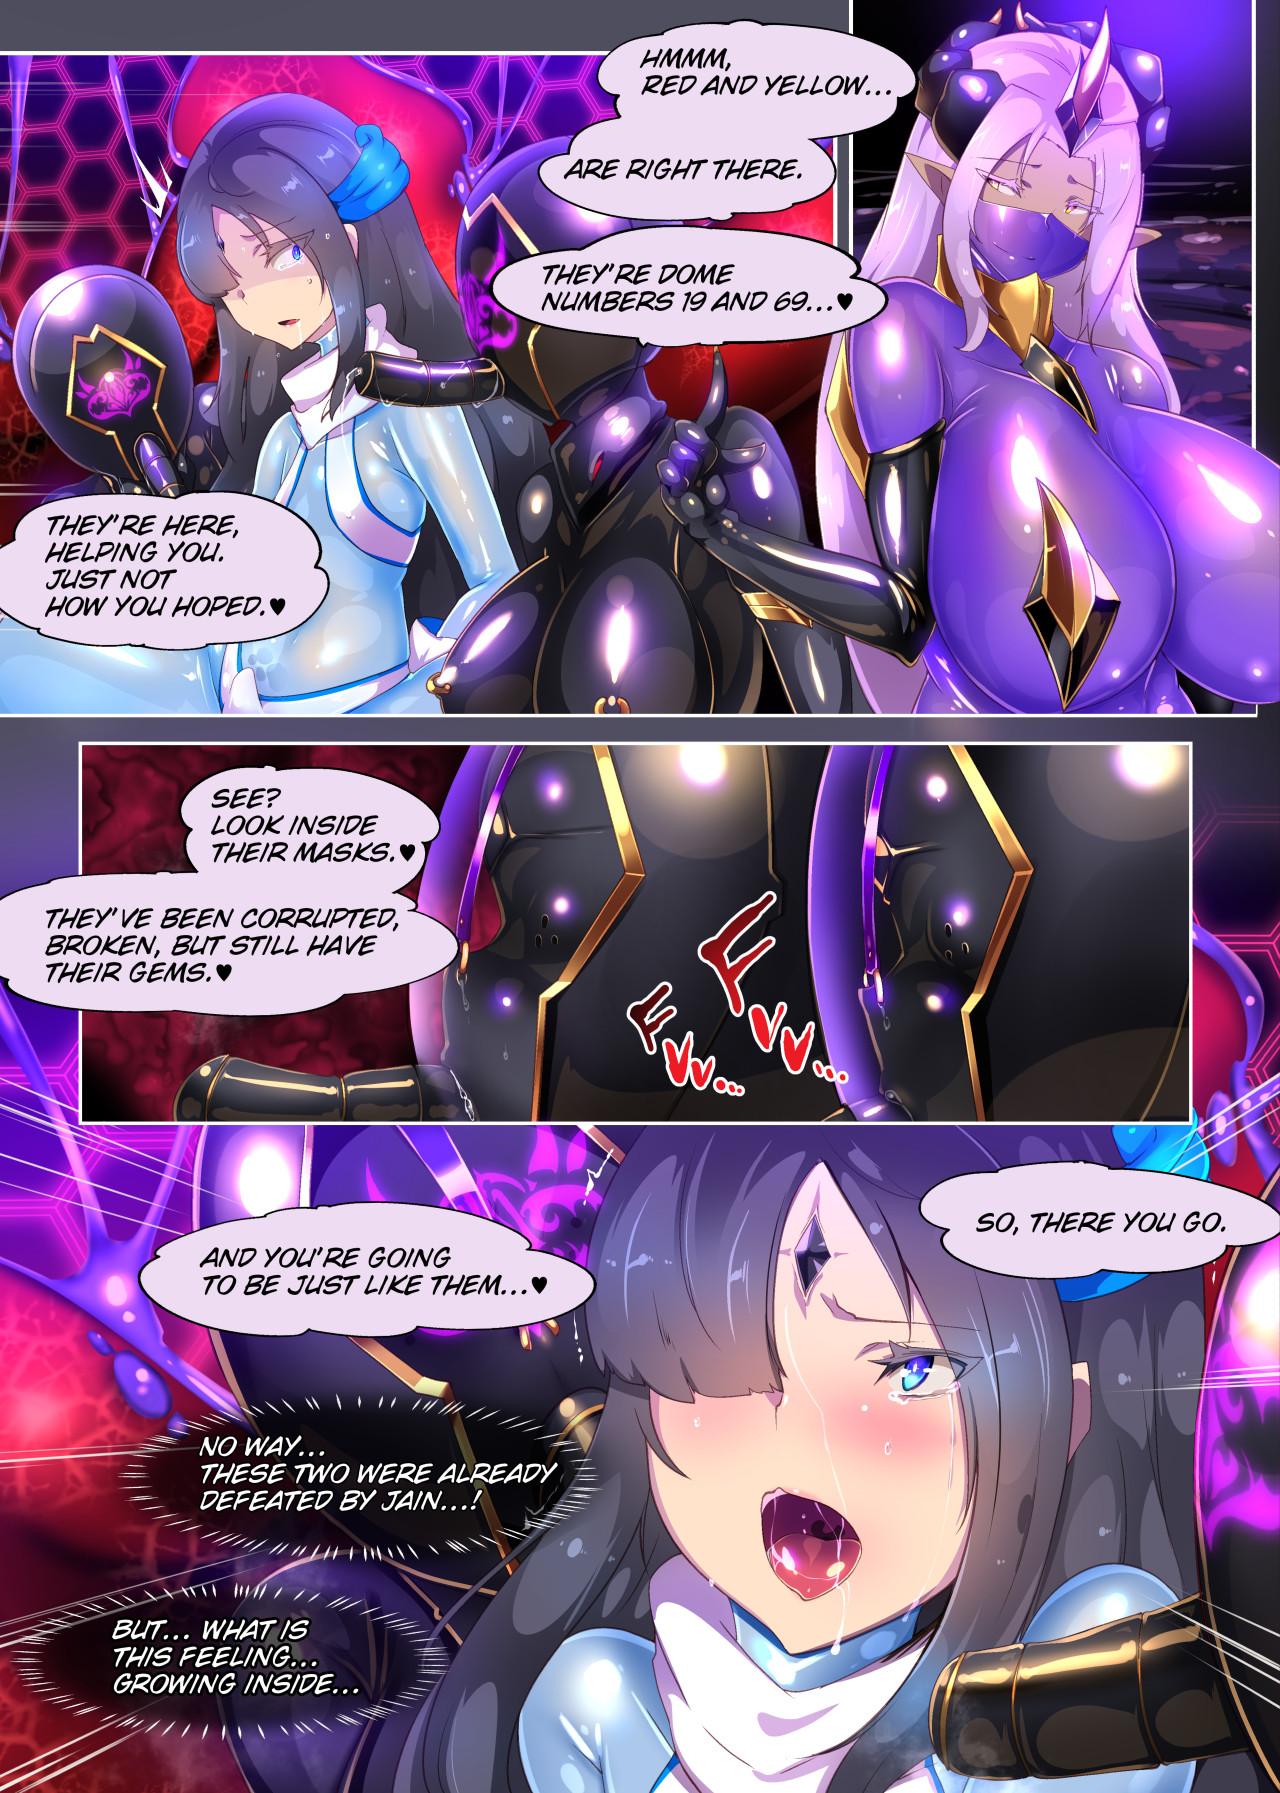 Spy Camera The story of the final fallen hero becoming a lewd, high ranking female officer. ーSHINING PEARL SQUAD: GAIN'S NEWEST EXECUTIVE.ー Sucking Dick - Page 8